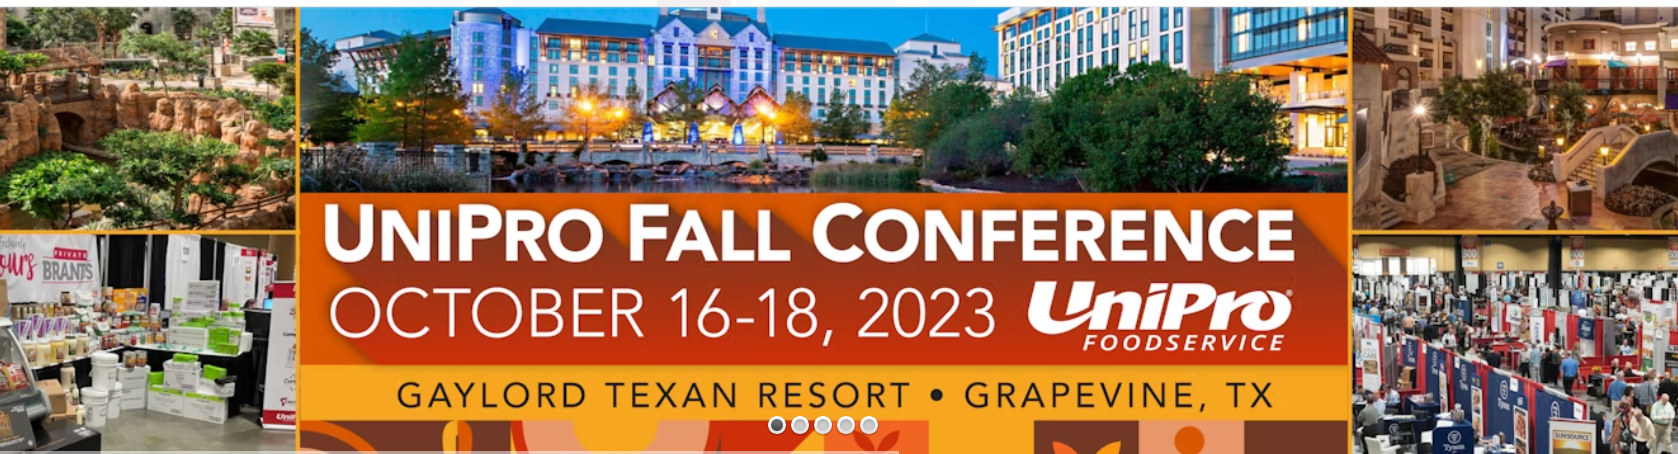 UniPro Fall 2023 Conference